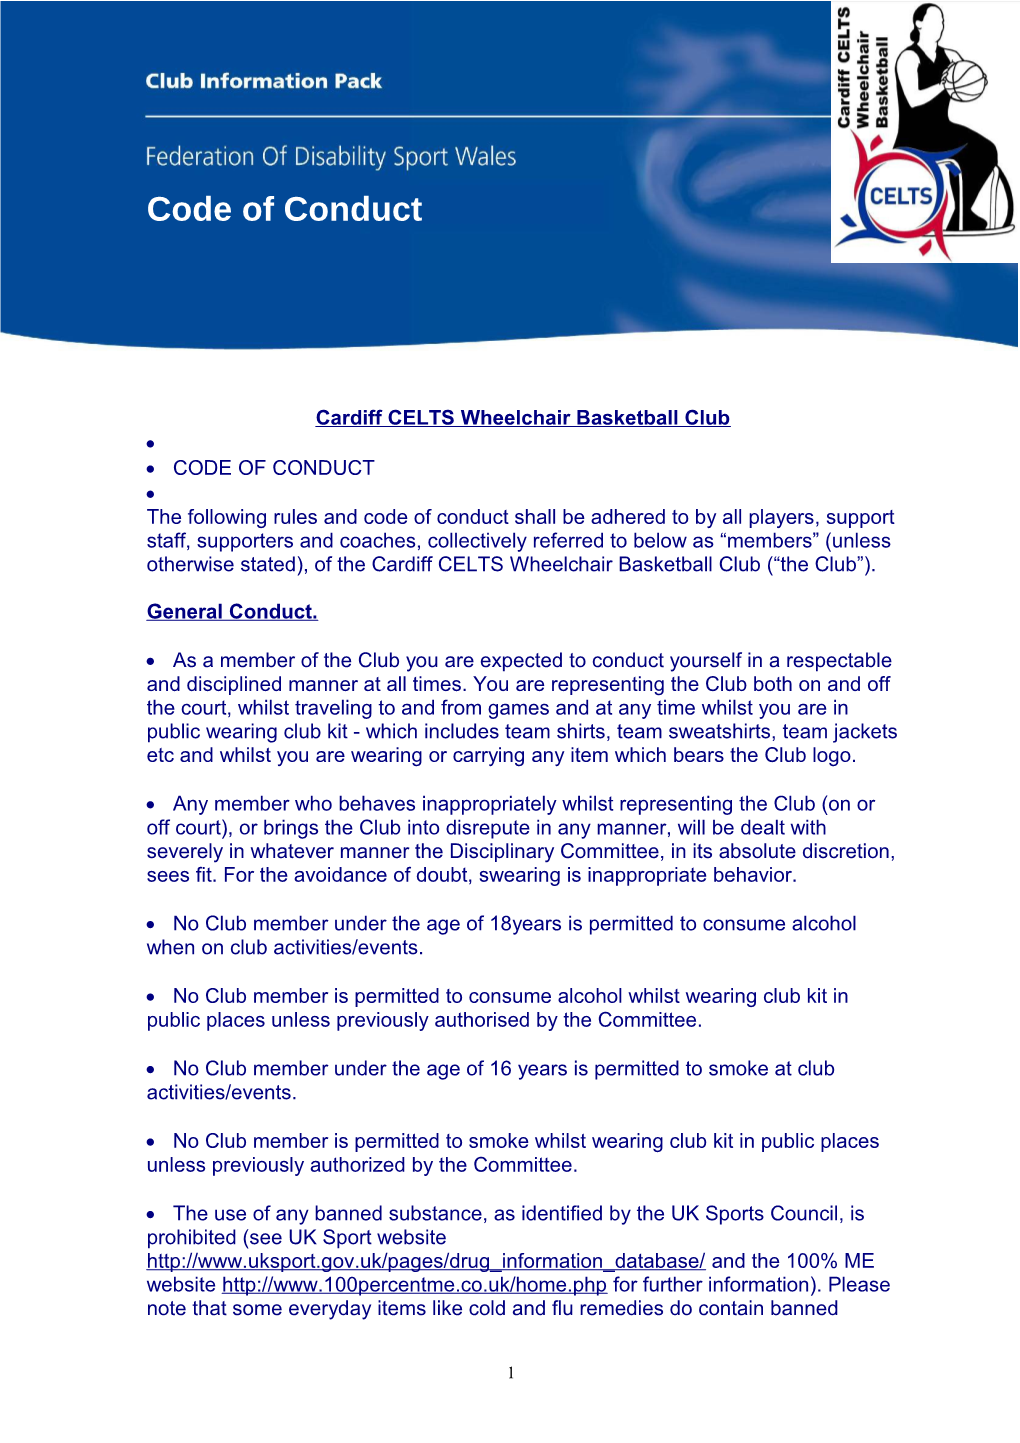 The Following Rules and Code of Conduct Shall Be Adhered to by All Players, and Officials (E